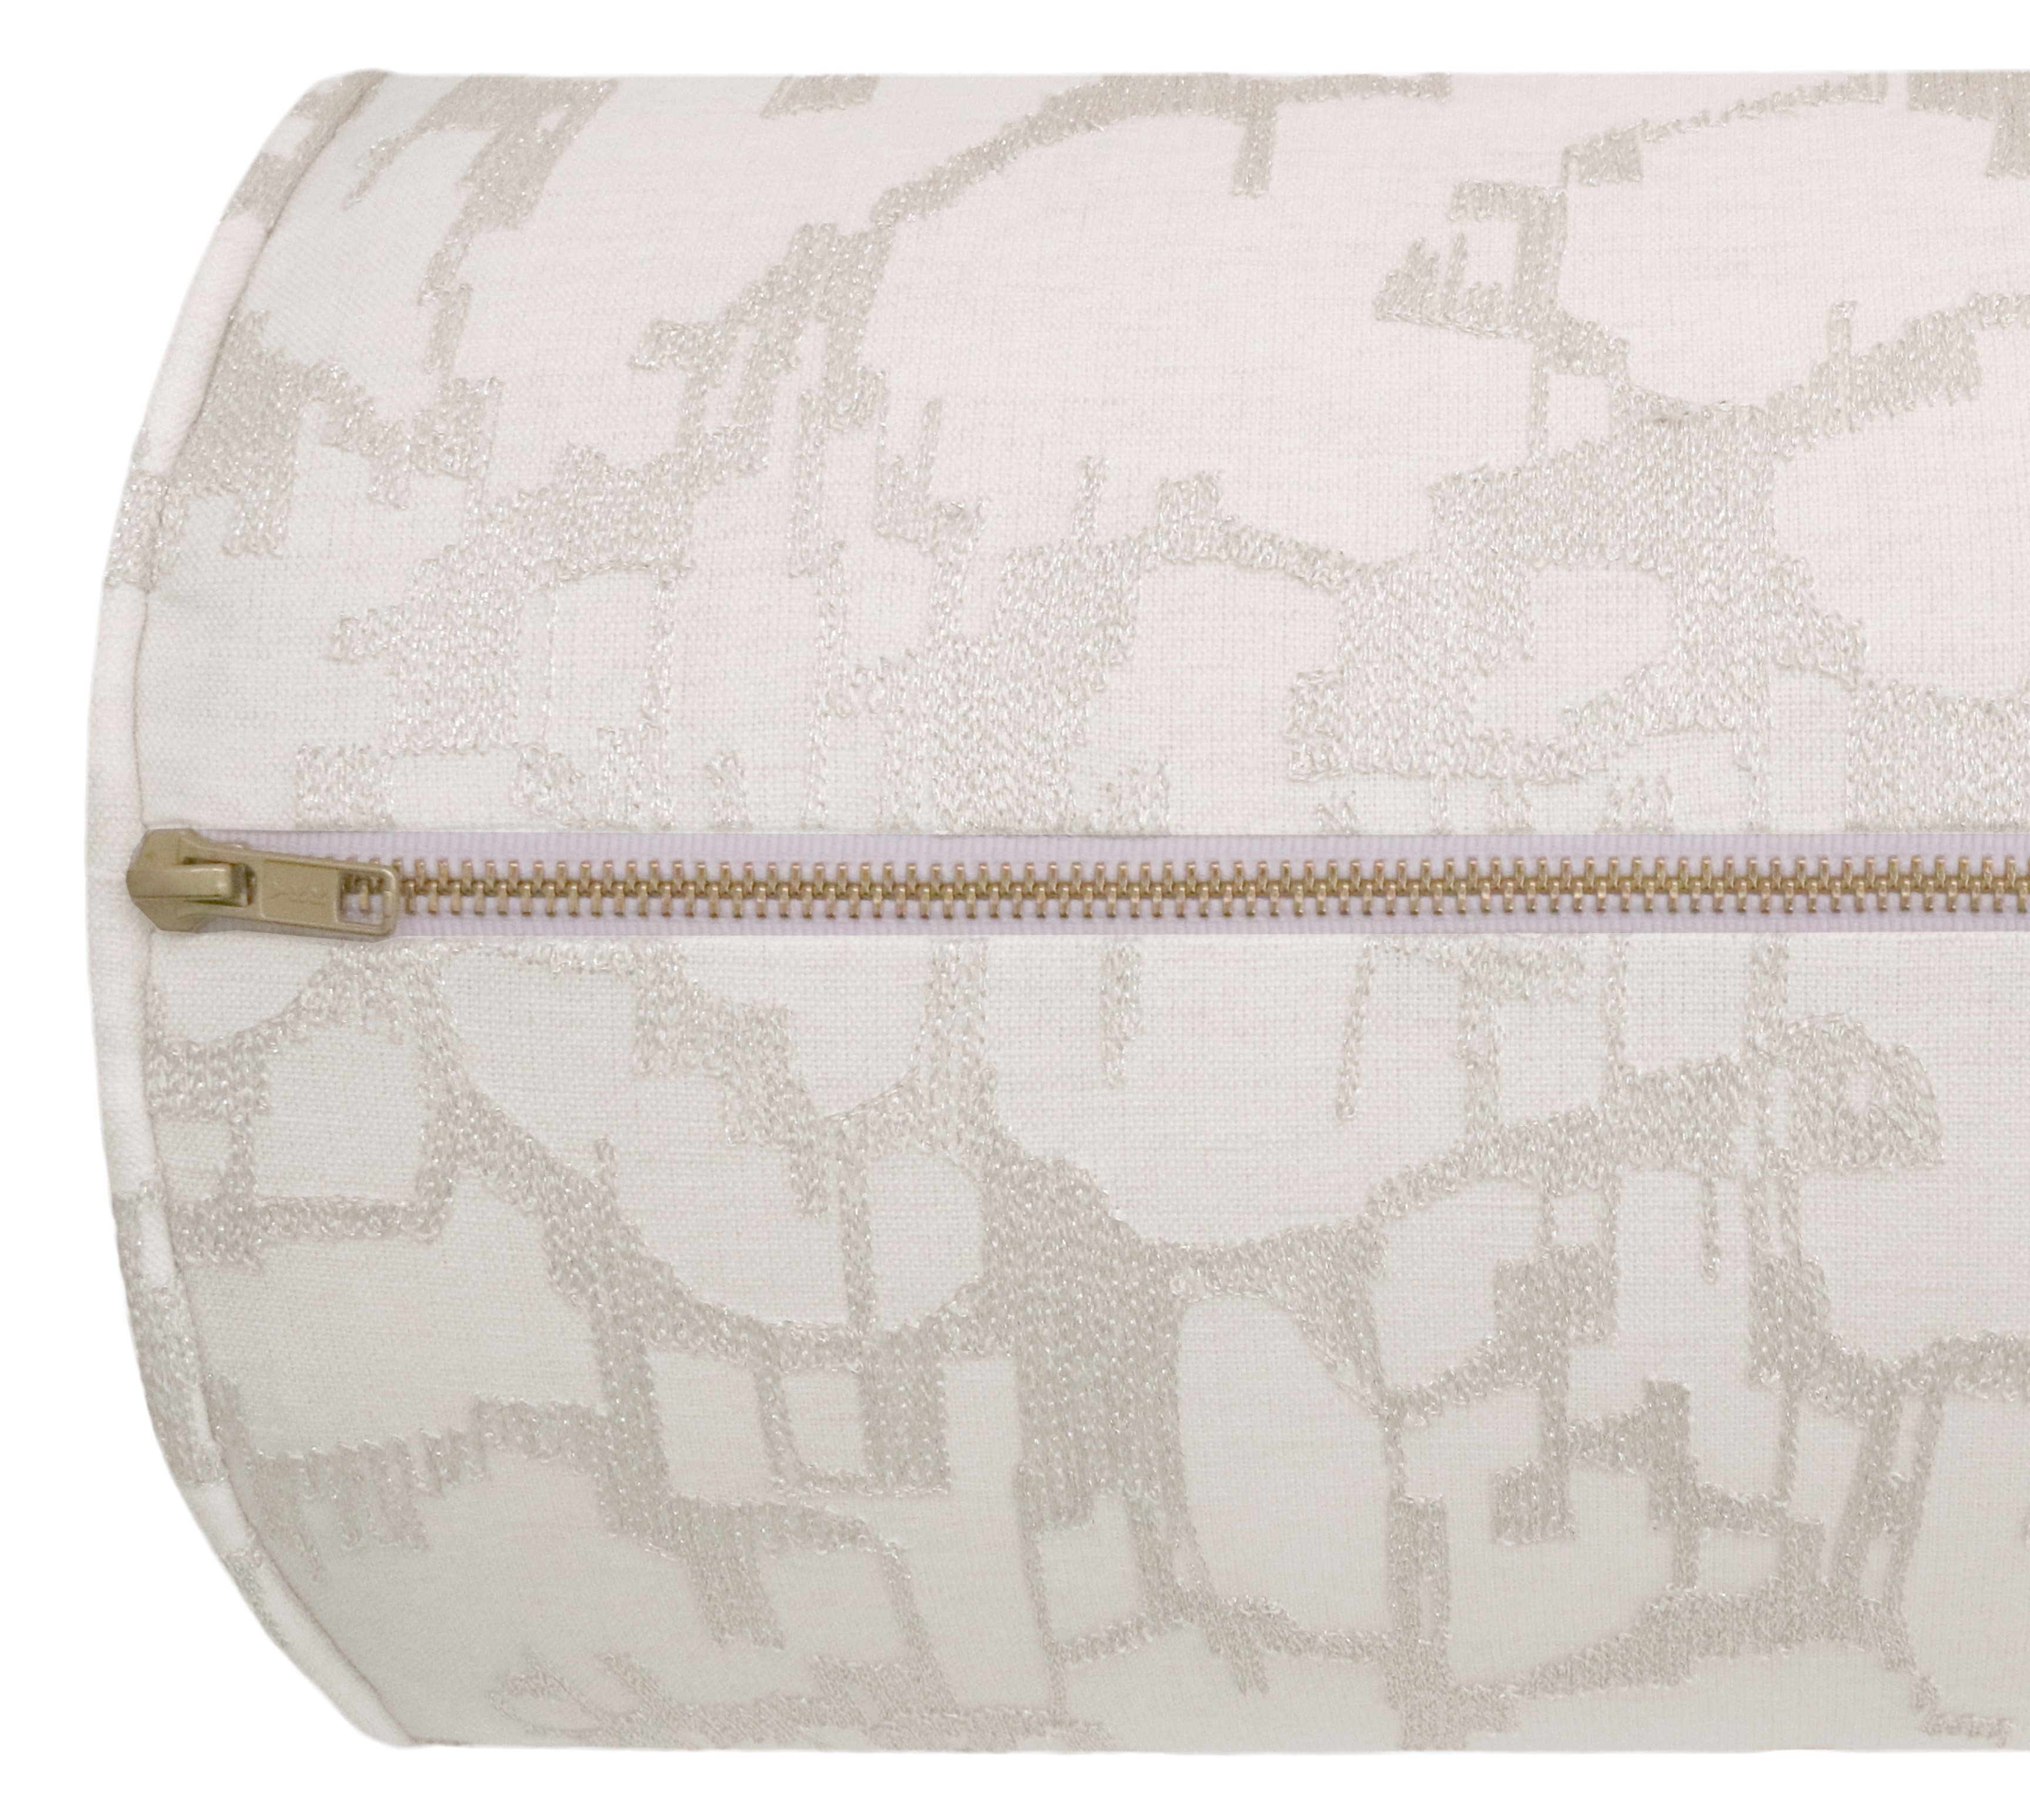 THE BOLSTER :: PASTICHE LINEN // ALABASTER - KING // 9" X 48" - Image 3